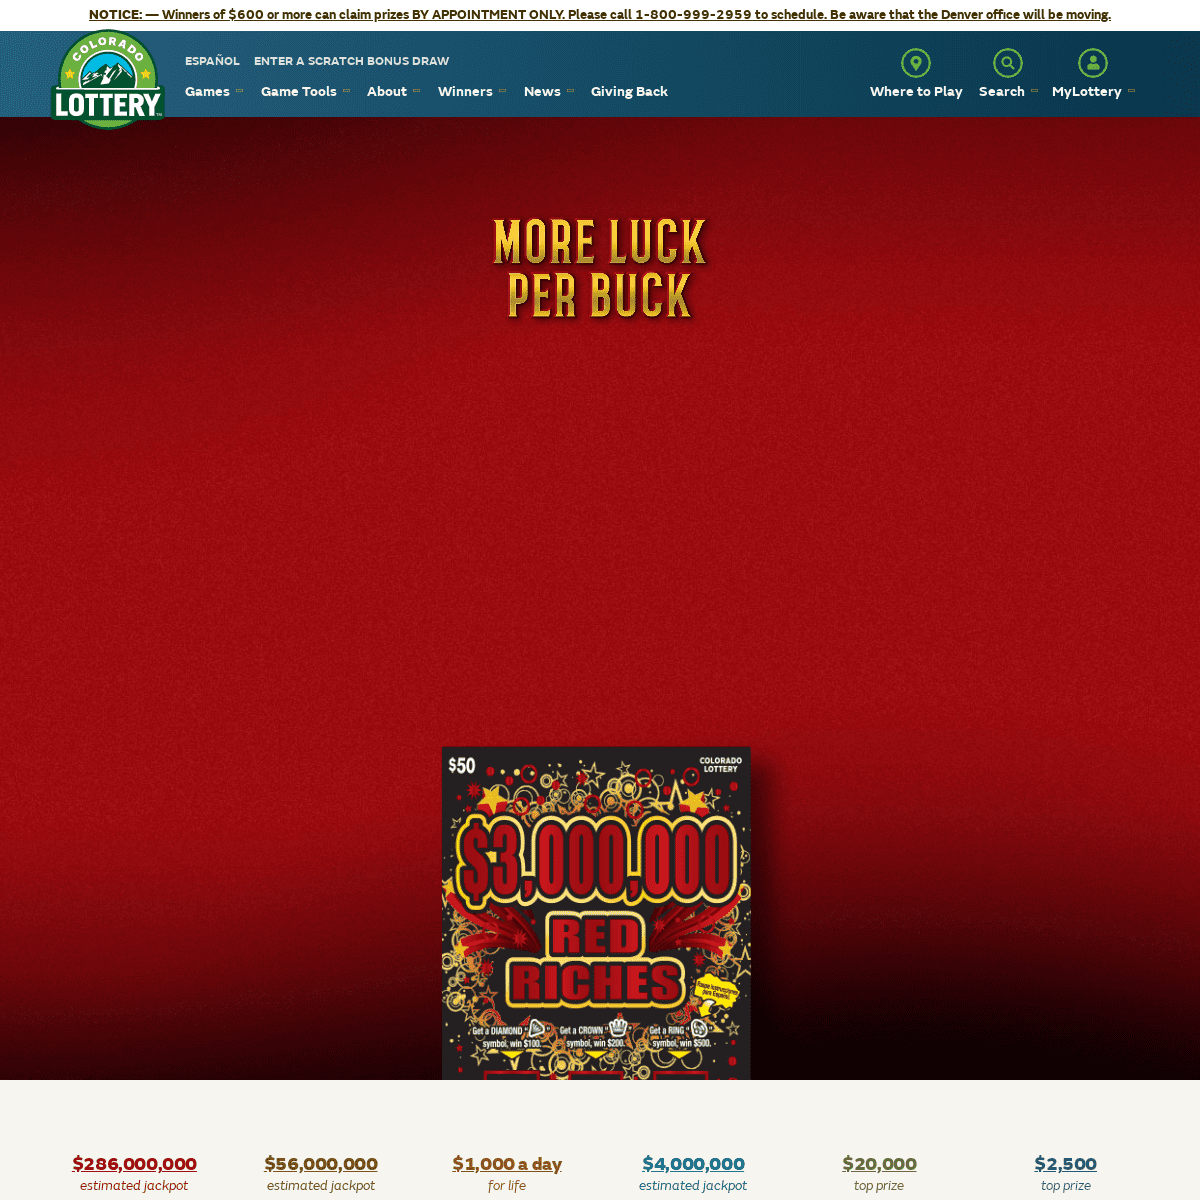 A complete backup of https://coloradolottery.com